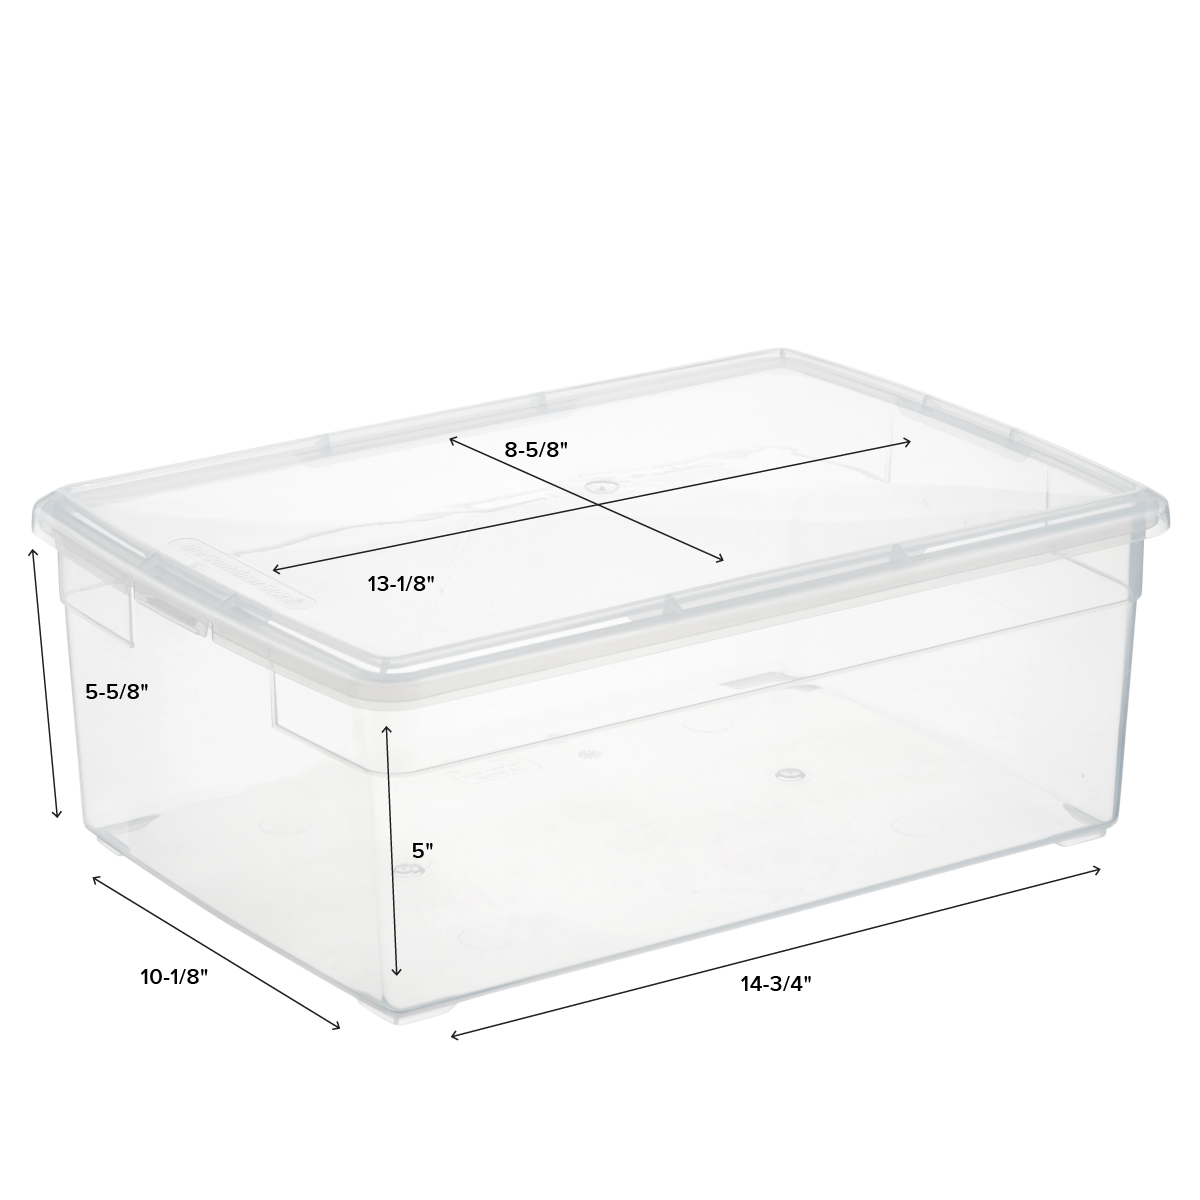 Lot of 6 Clear Acrylic 5 Compartment Storage Bin 20" x 3" 